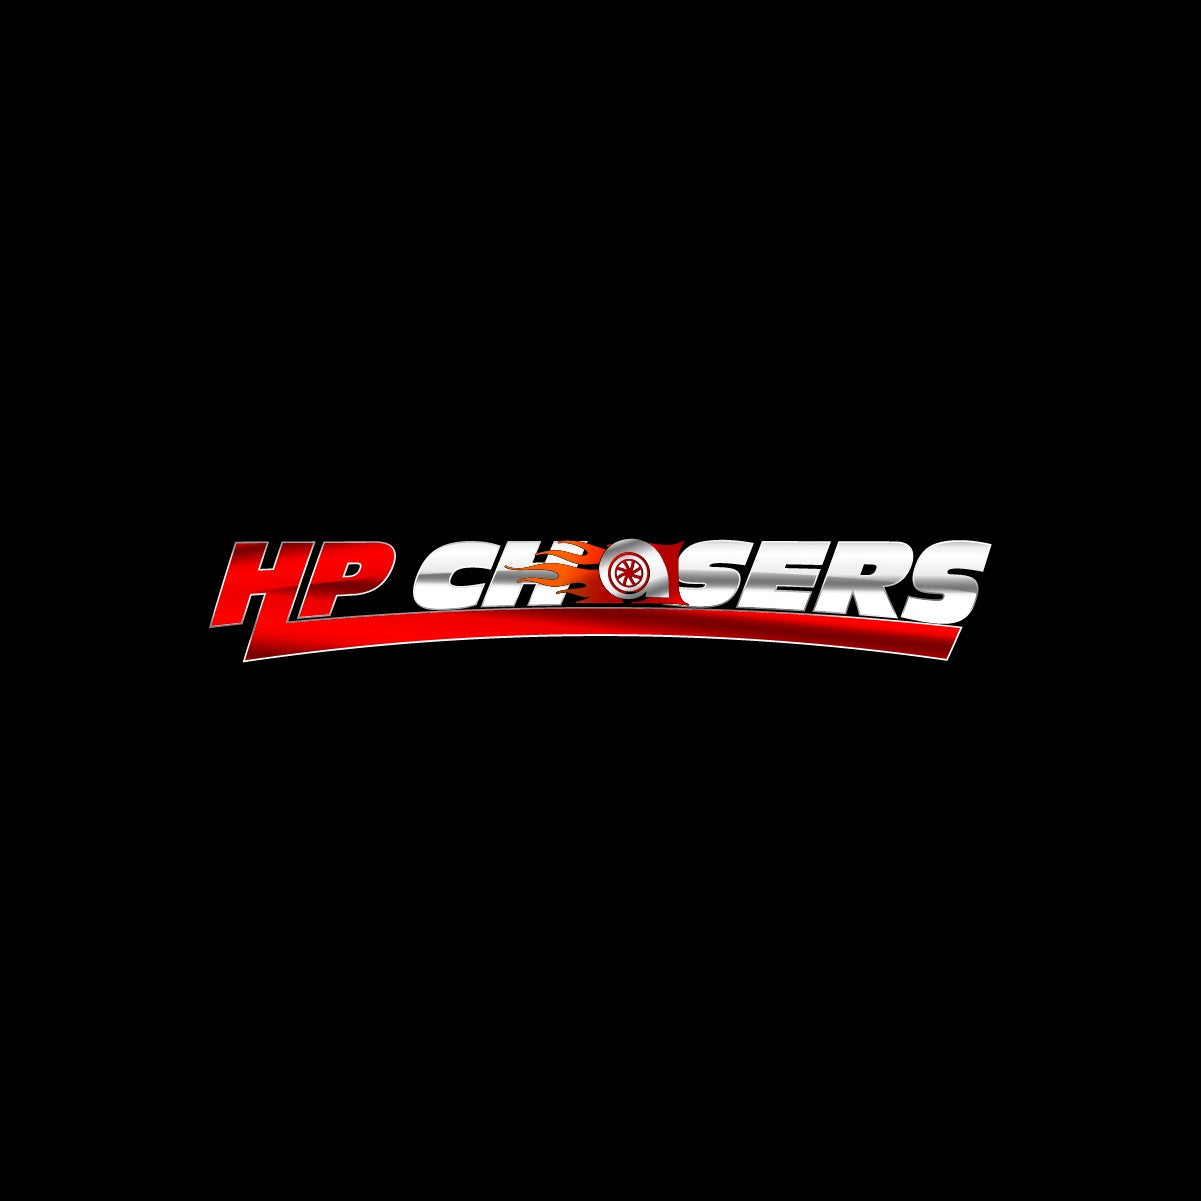 Load video: Welcome to HP Chasers